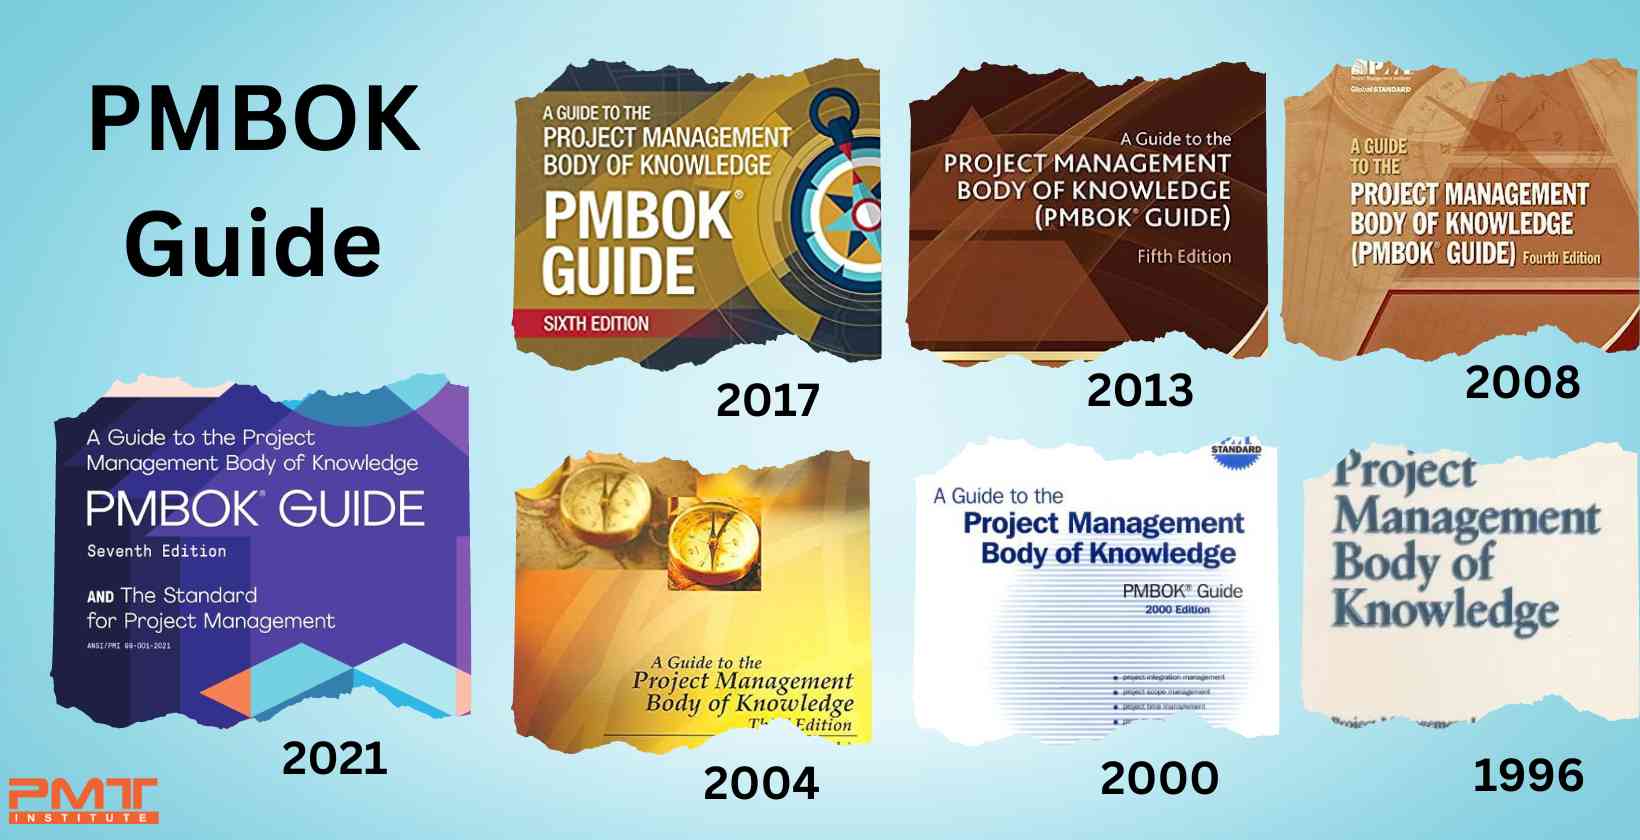 PMBOK Guide: What is it, Purpose, and Importance